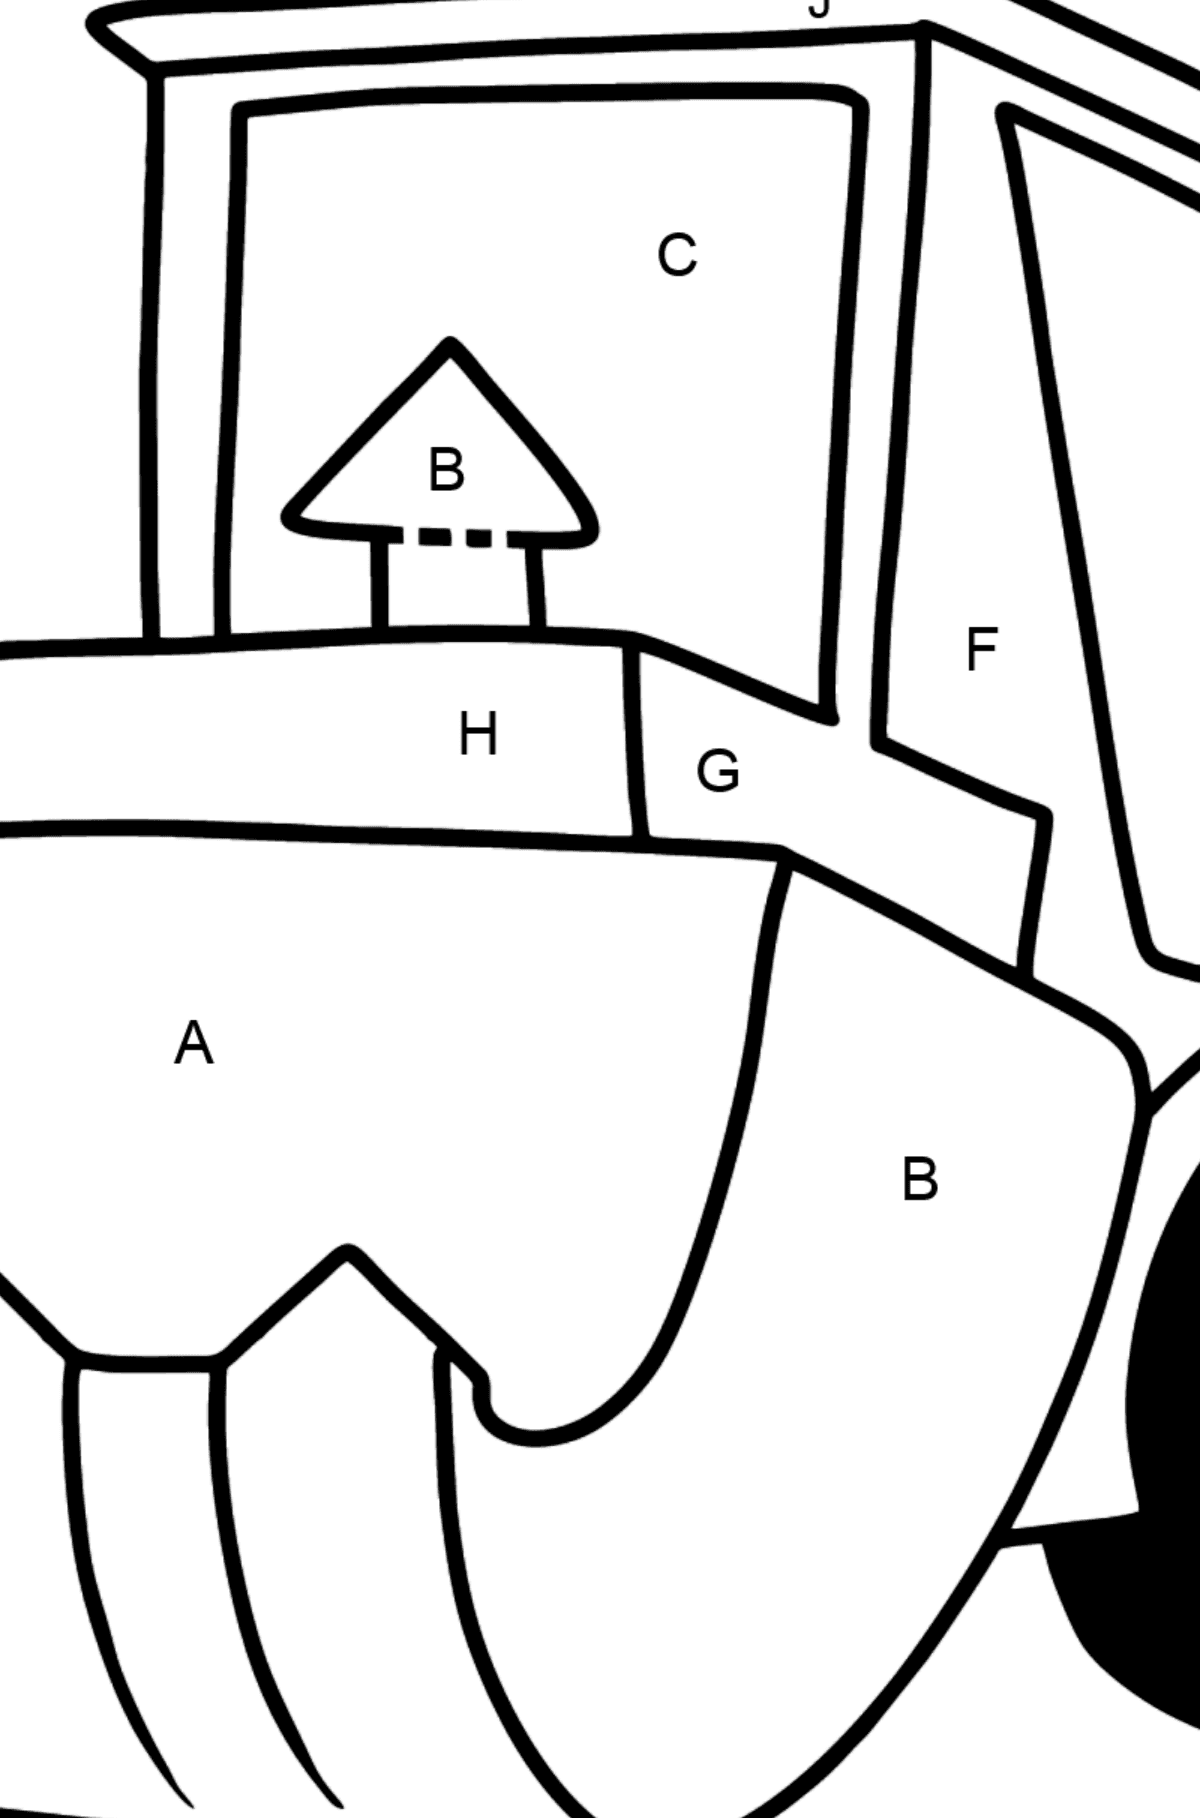 Tractor with Bag coloring page - Coloring by Letters for Kids